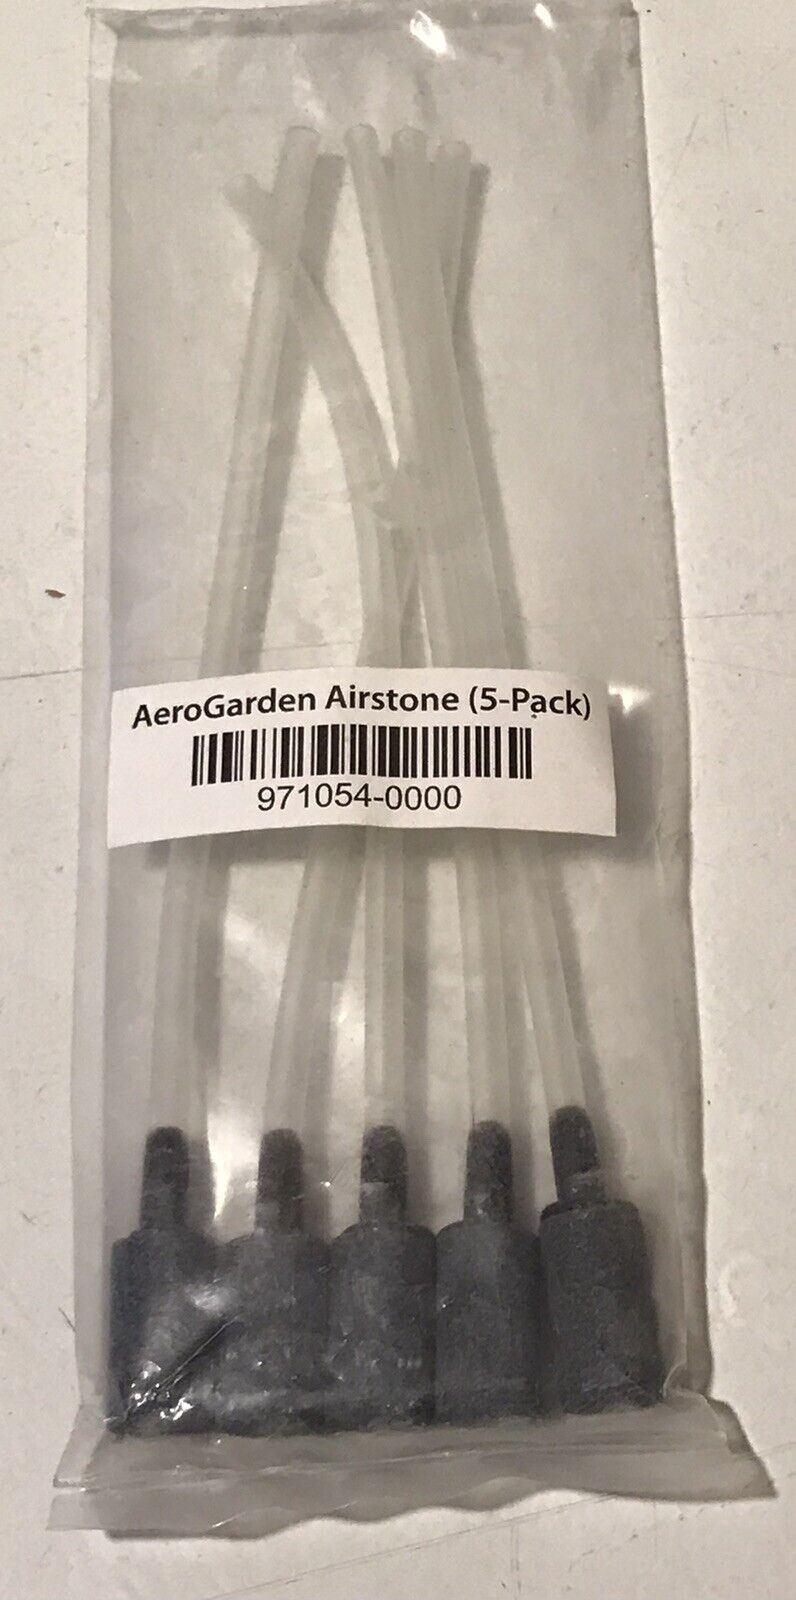 AeroGarden Airstone (5-Pack) Air Stones and Air Hoses